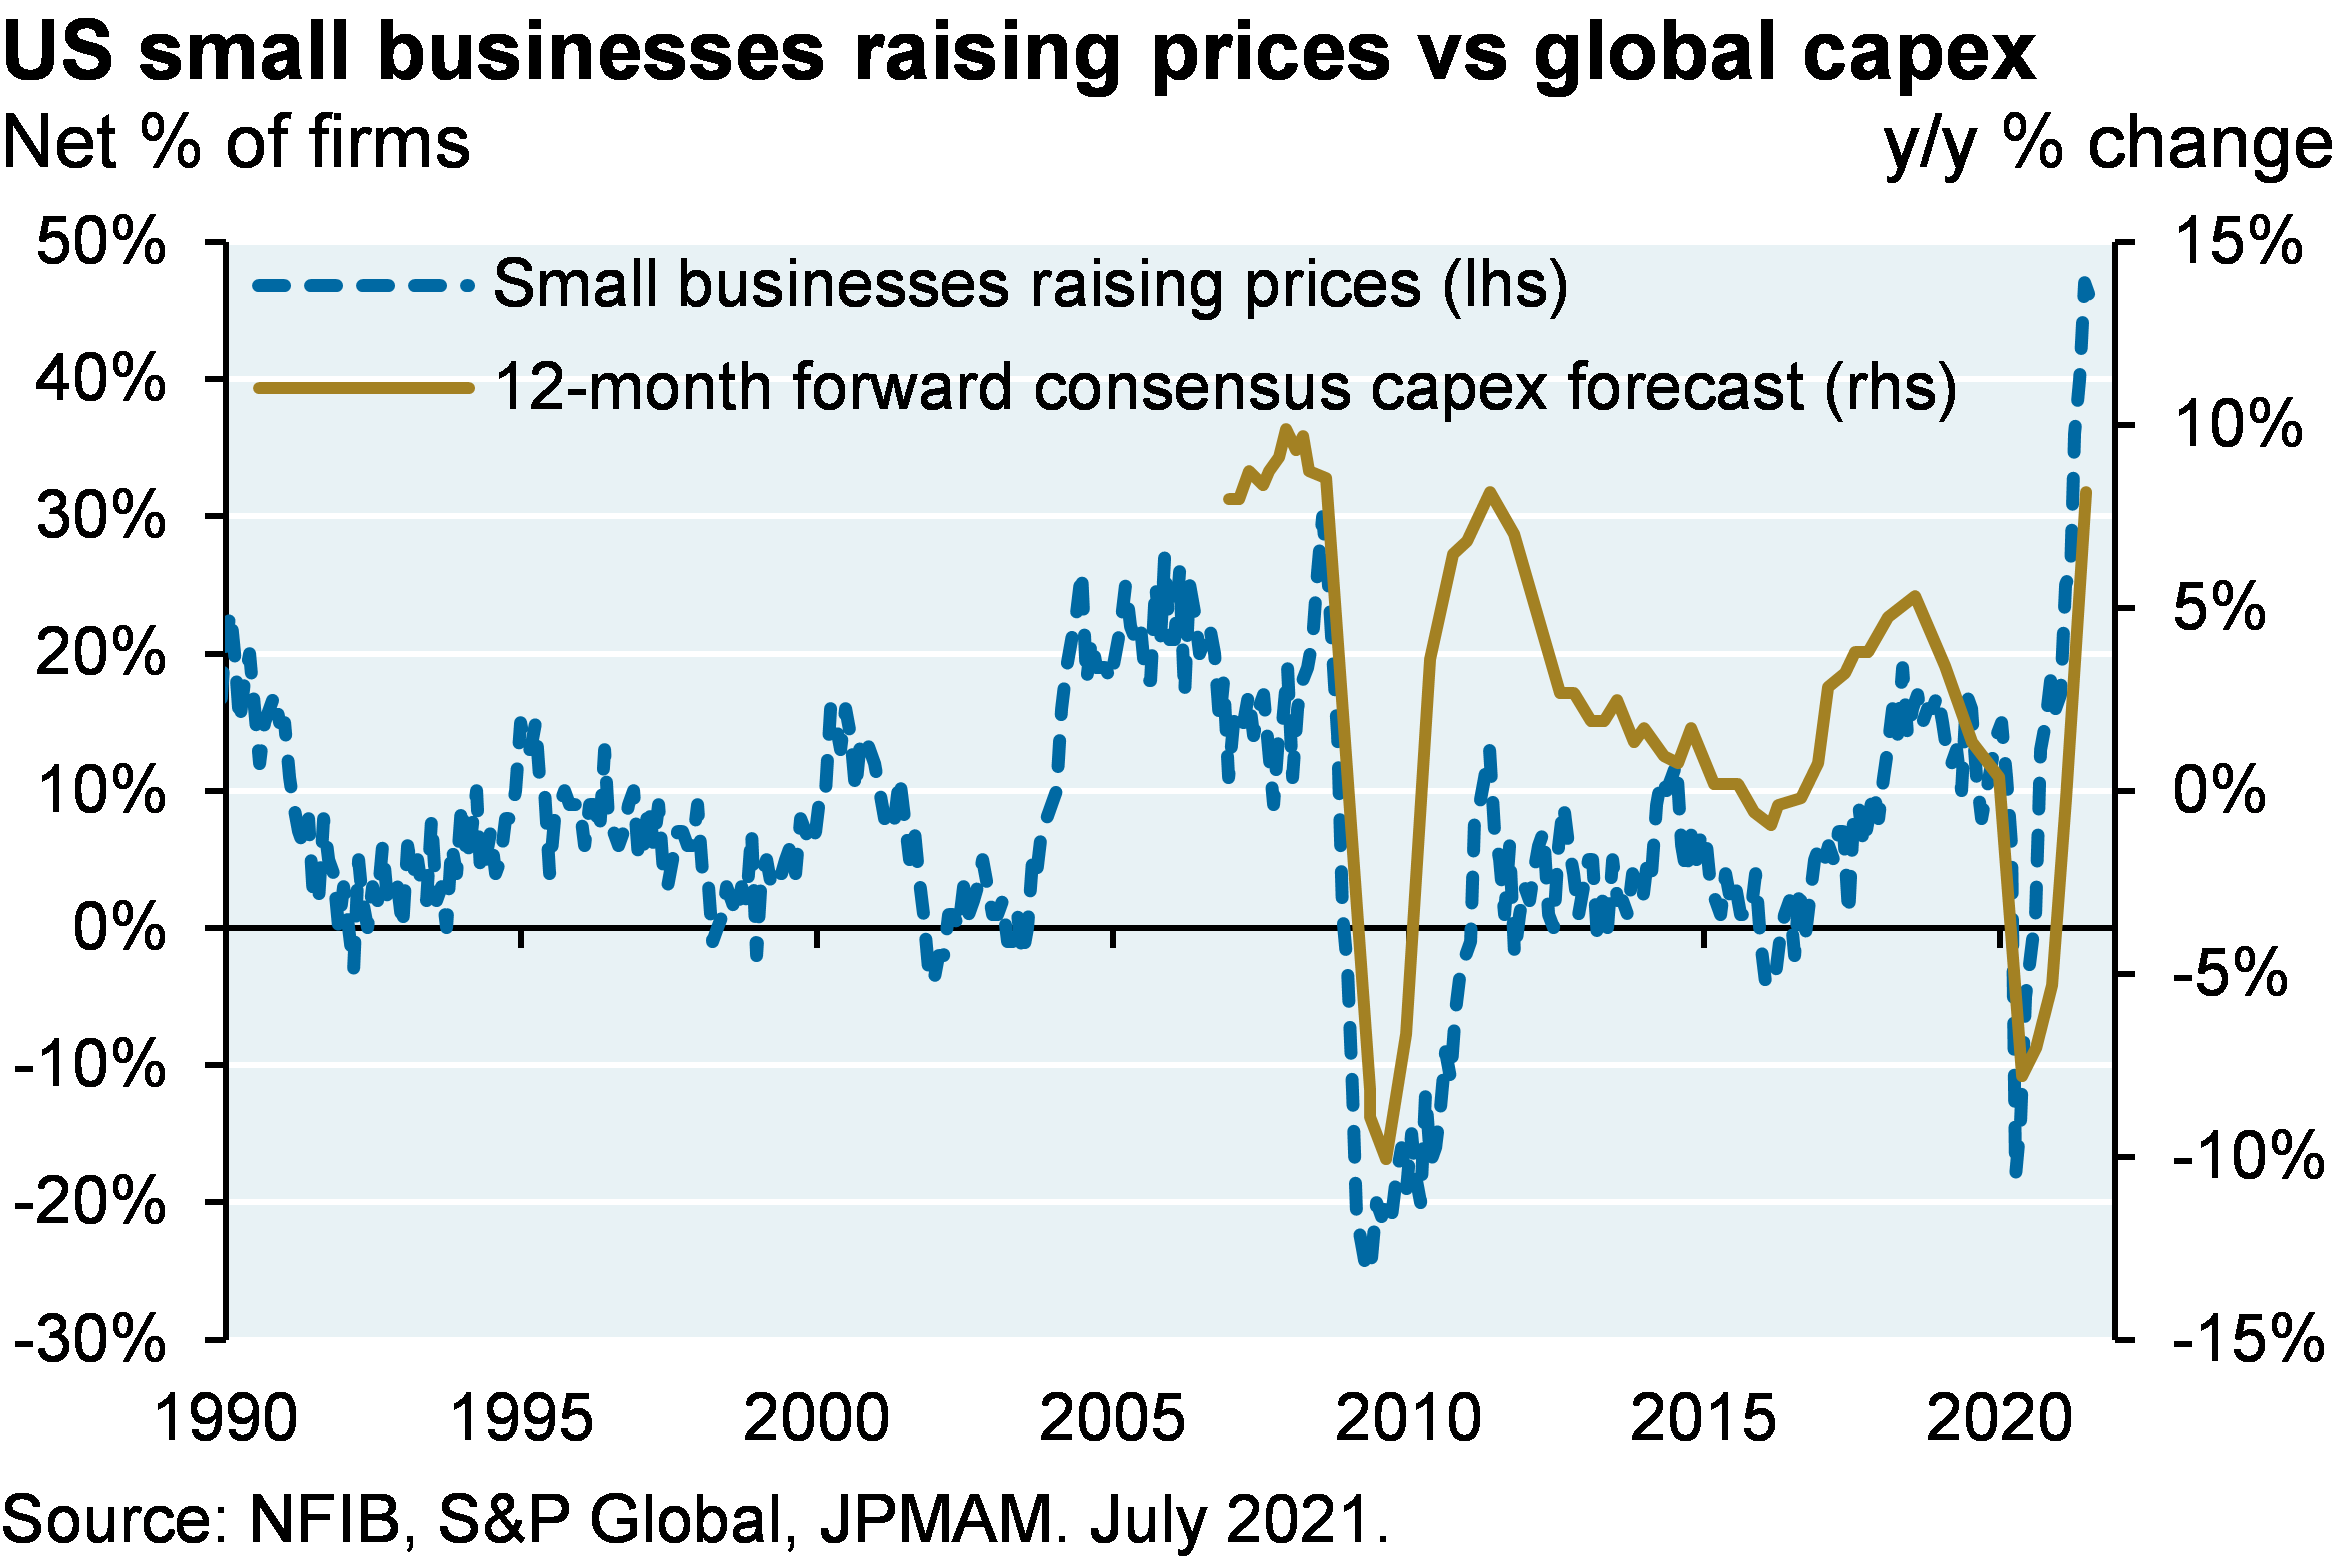 Line chart shows the net % of small business survey respondents raising prices and the global 12-month forward consensus capex forecast, shown as the y/y % change. Chart shows that the net % of small businesses raising prices has sharply increased from -20% in 2020 to its most recent value of nearly 50%. Chart shows that the y/y % change in consensus capex forecasts have recently spiked from around -8% in 2020 to 8% at its most recent point, which is close to all its all-time highs of ~10% in the early 2000s.